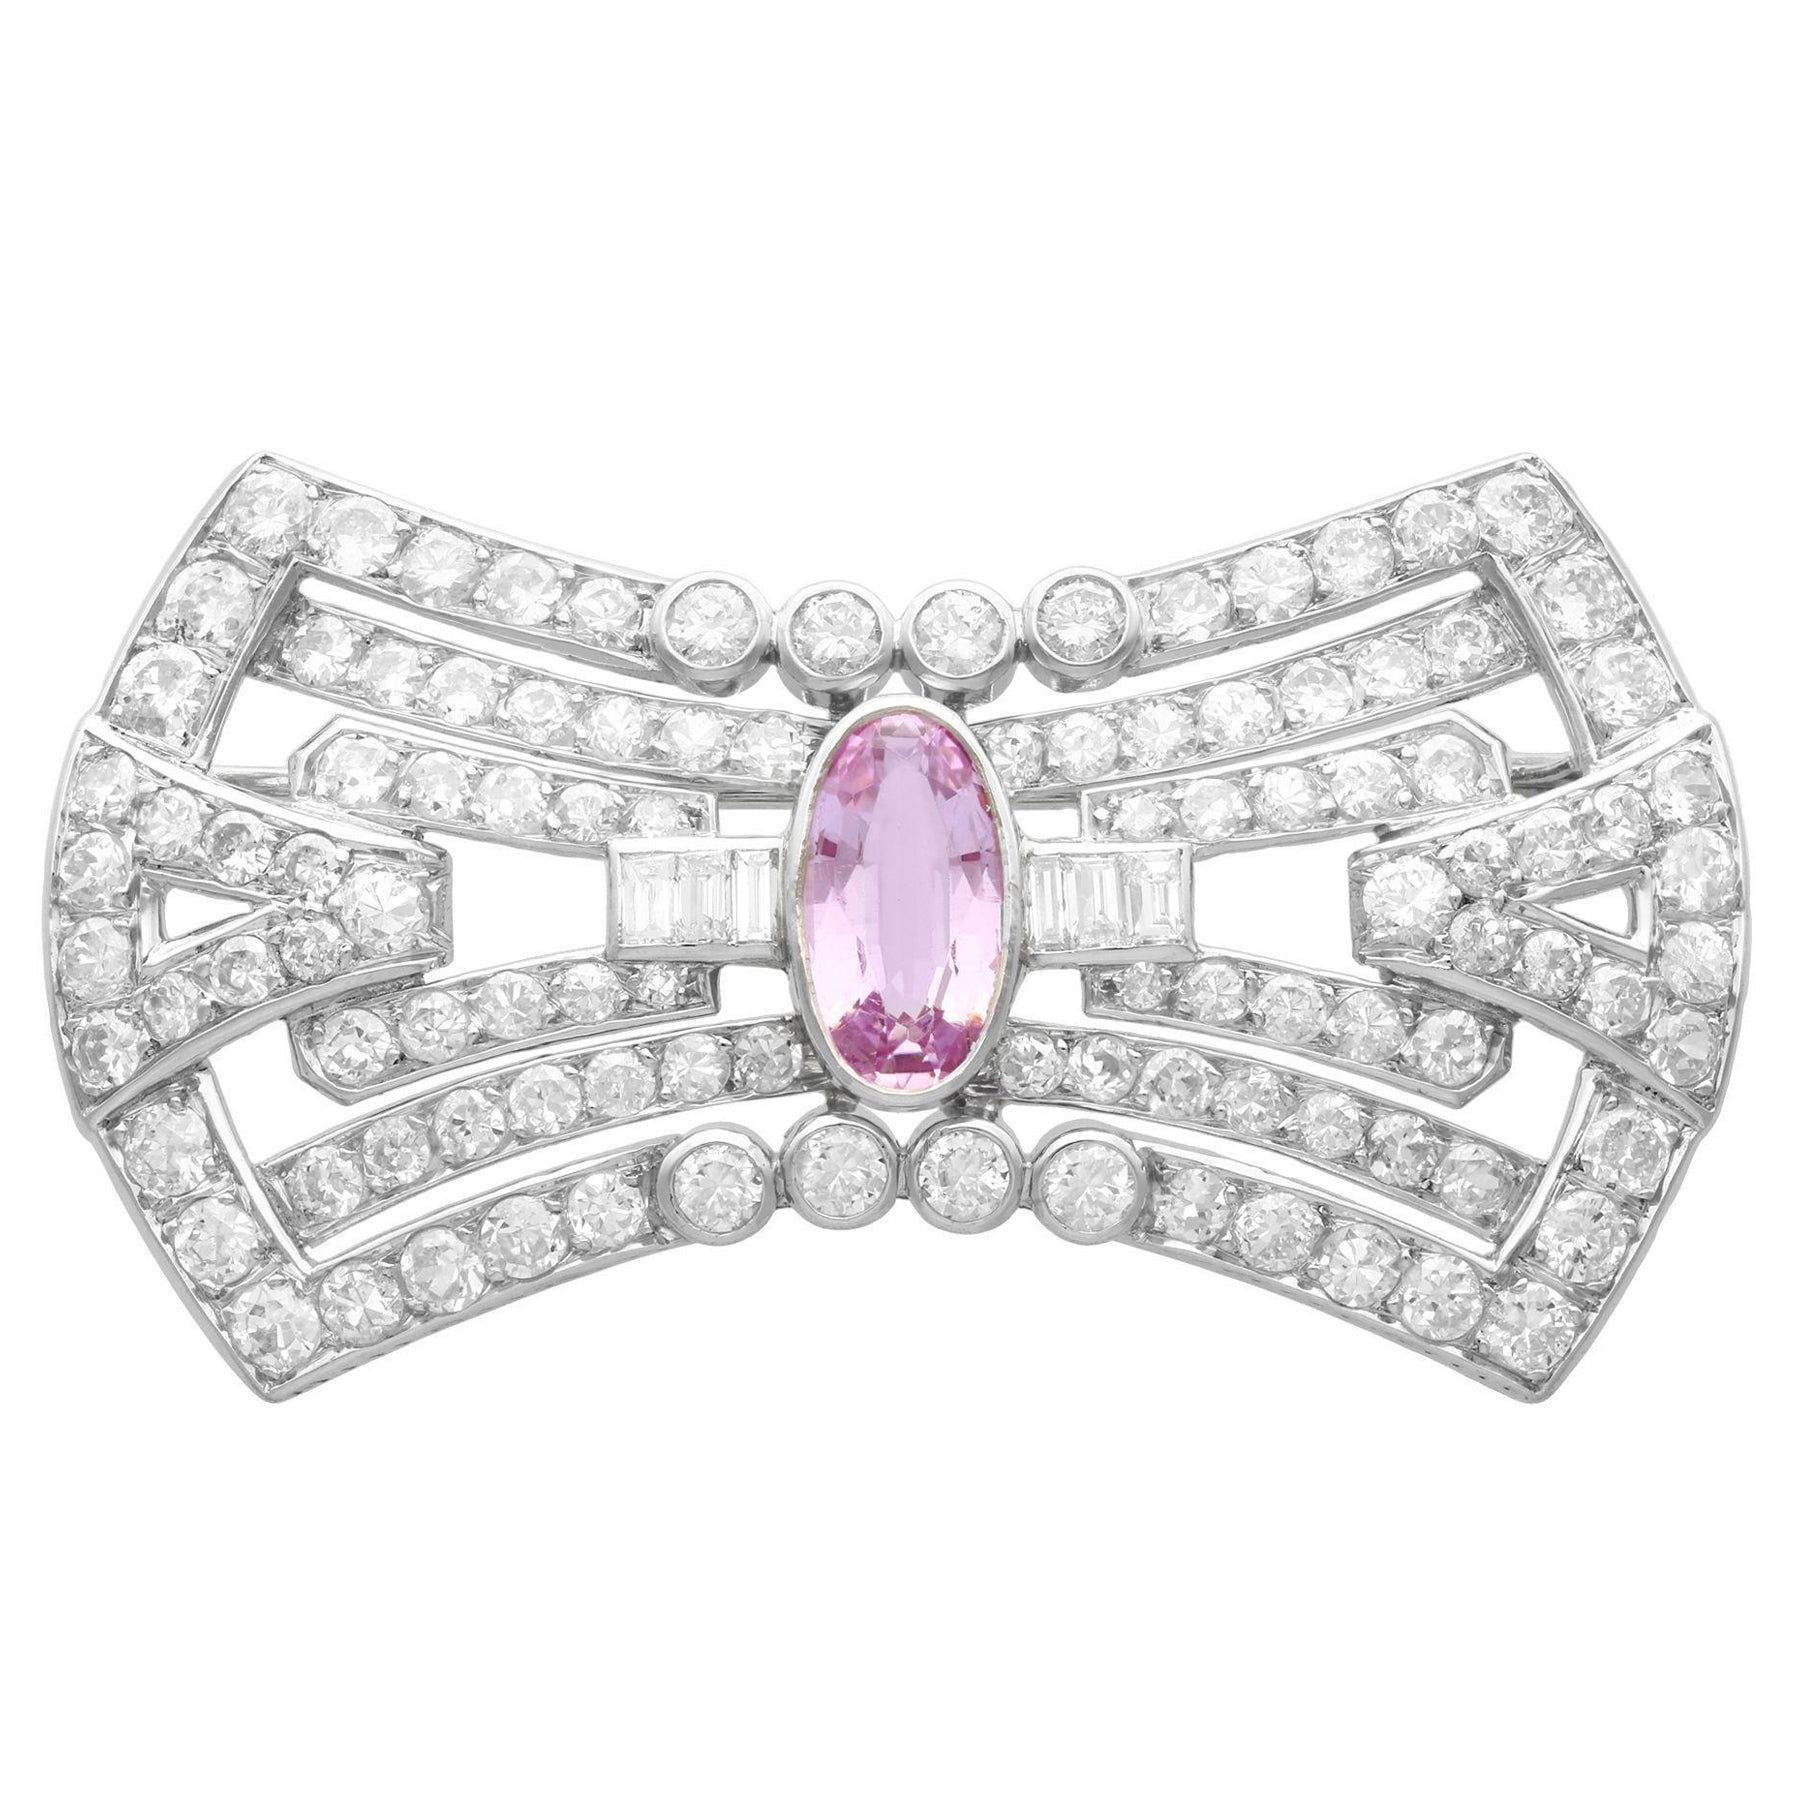 Antique French 3.08 Carat Pink Topaz and 7.02 Carat Diamond and Platinum Brooch For Sale